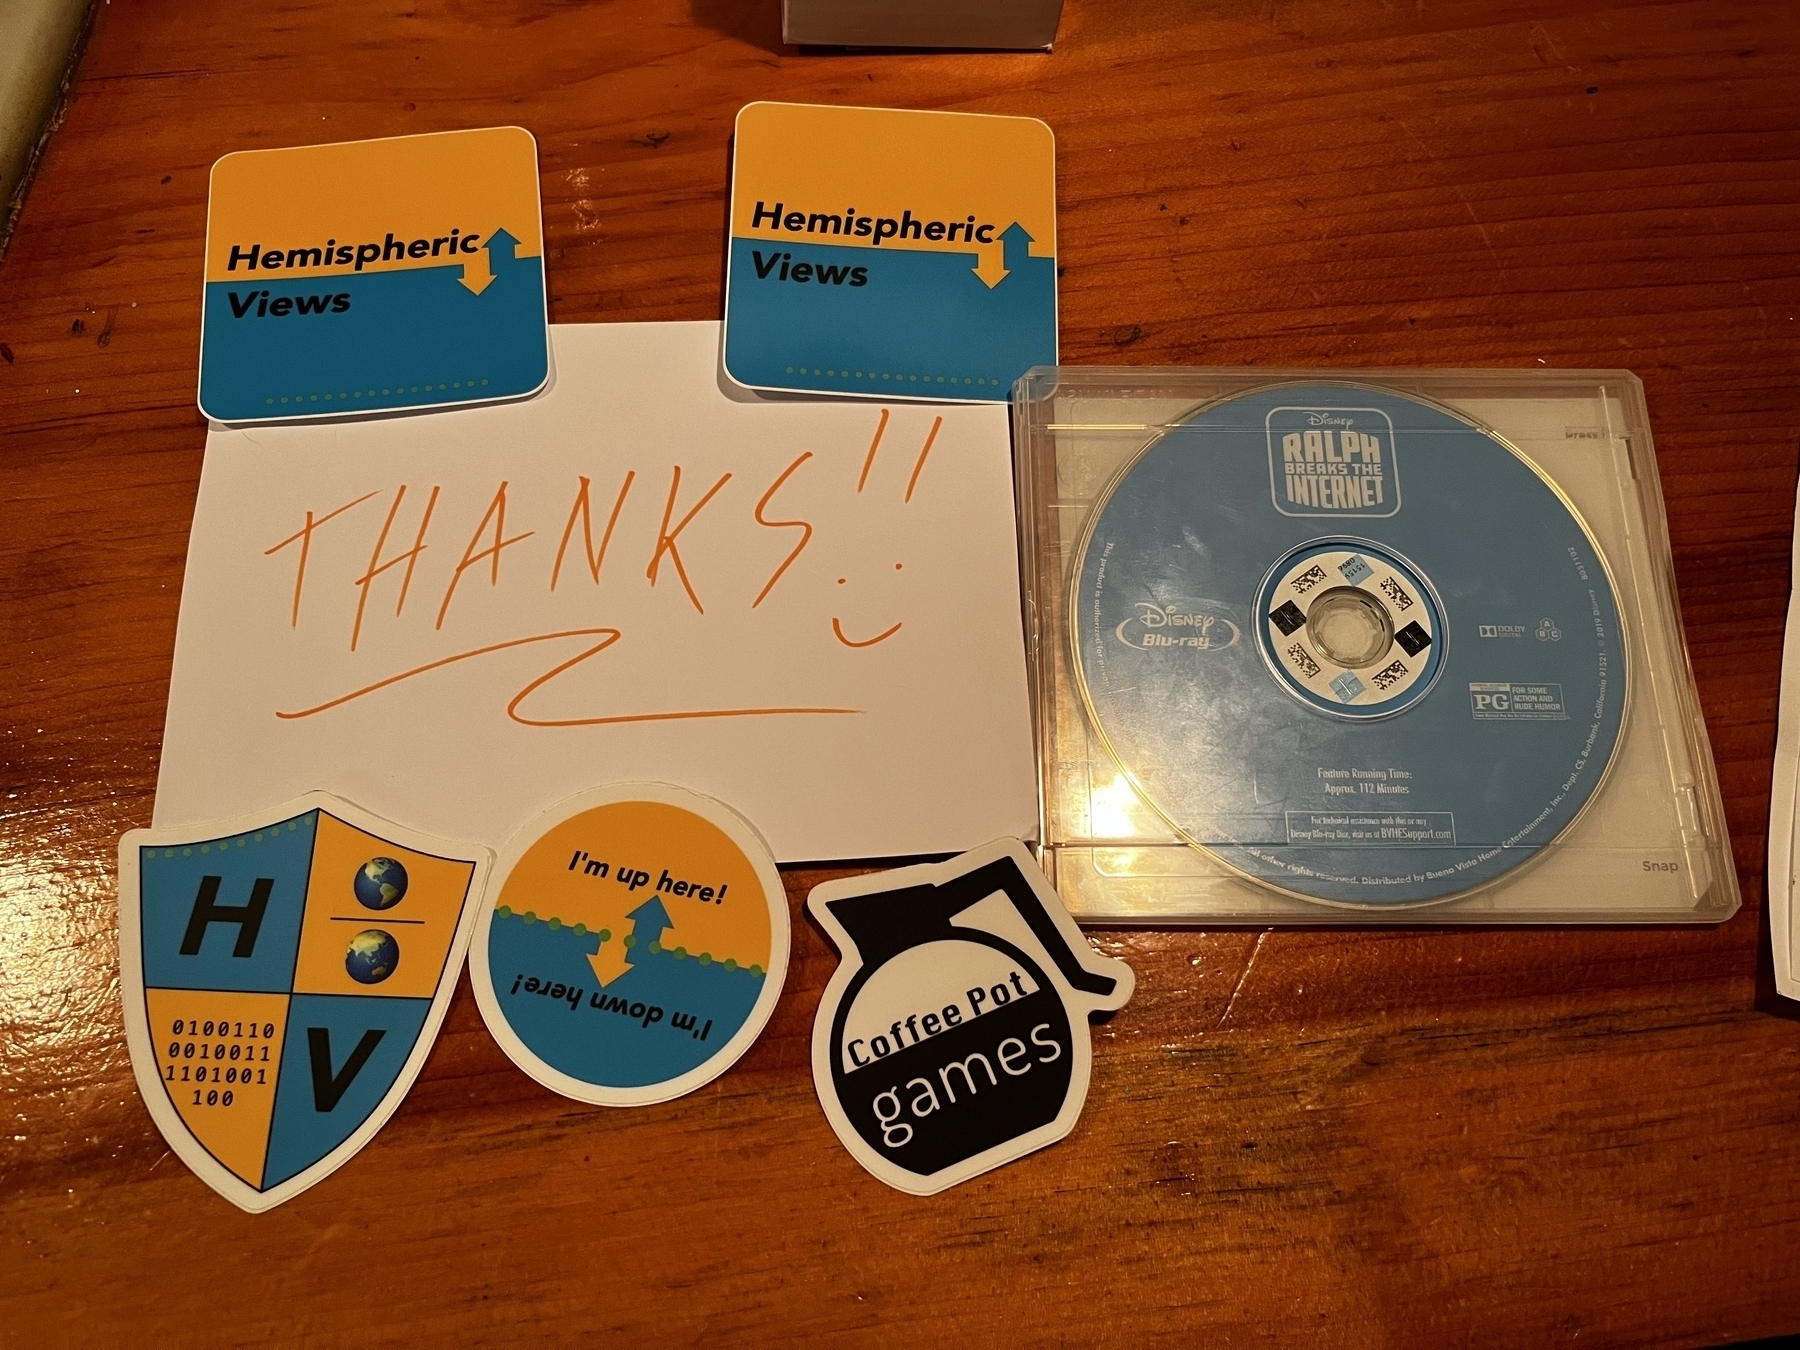 A thank you sign with Hemispheric Views podcast stickers and a ‘Ralph Breaks the Internet’ Blu-ray Disc.